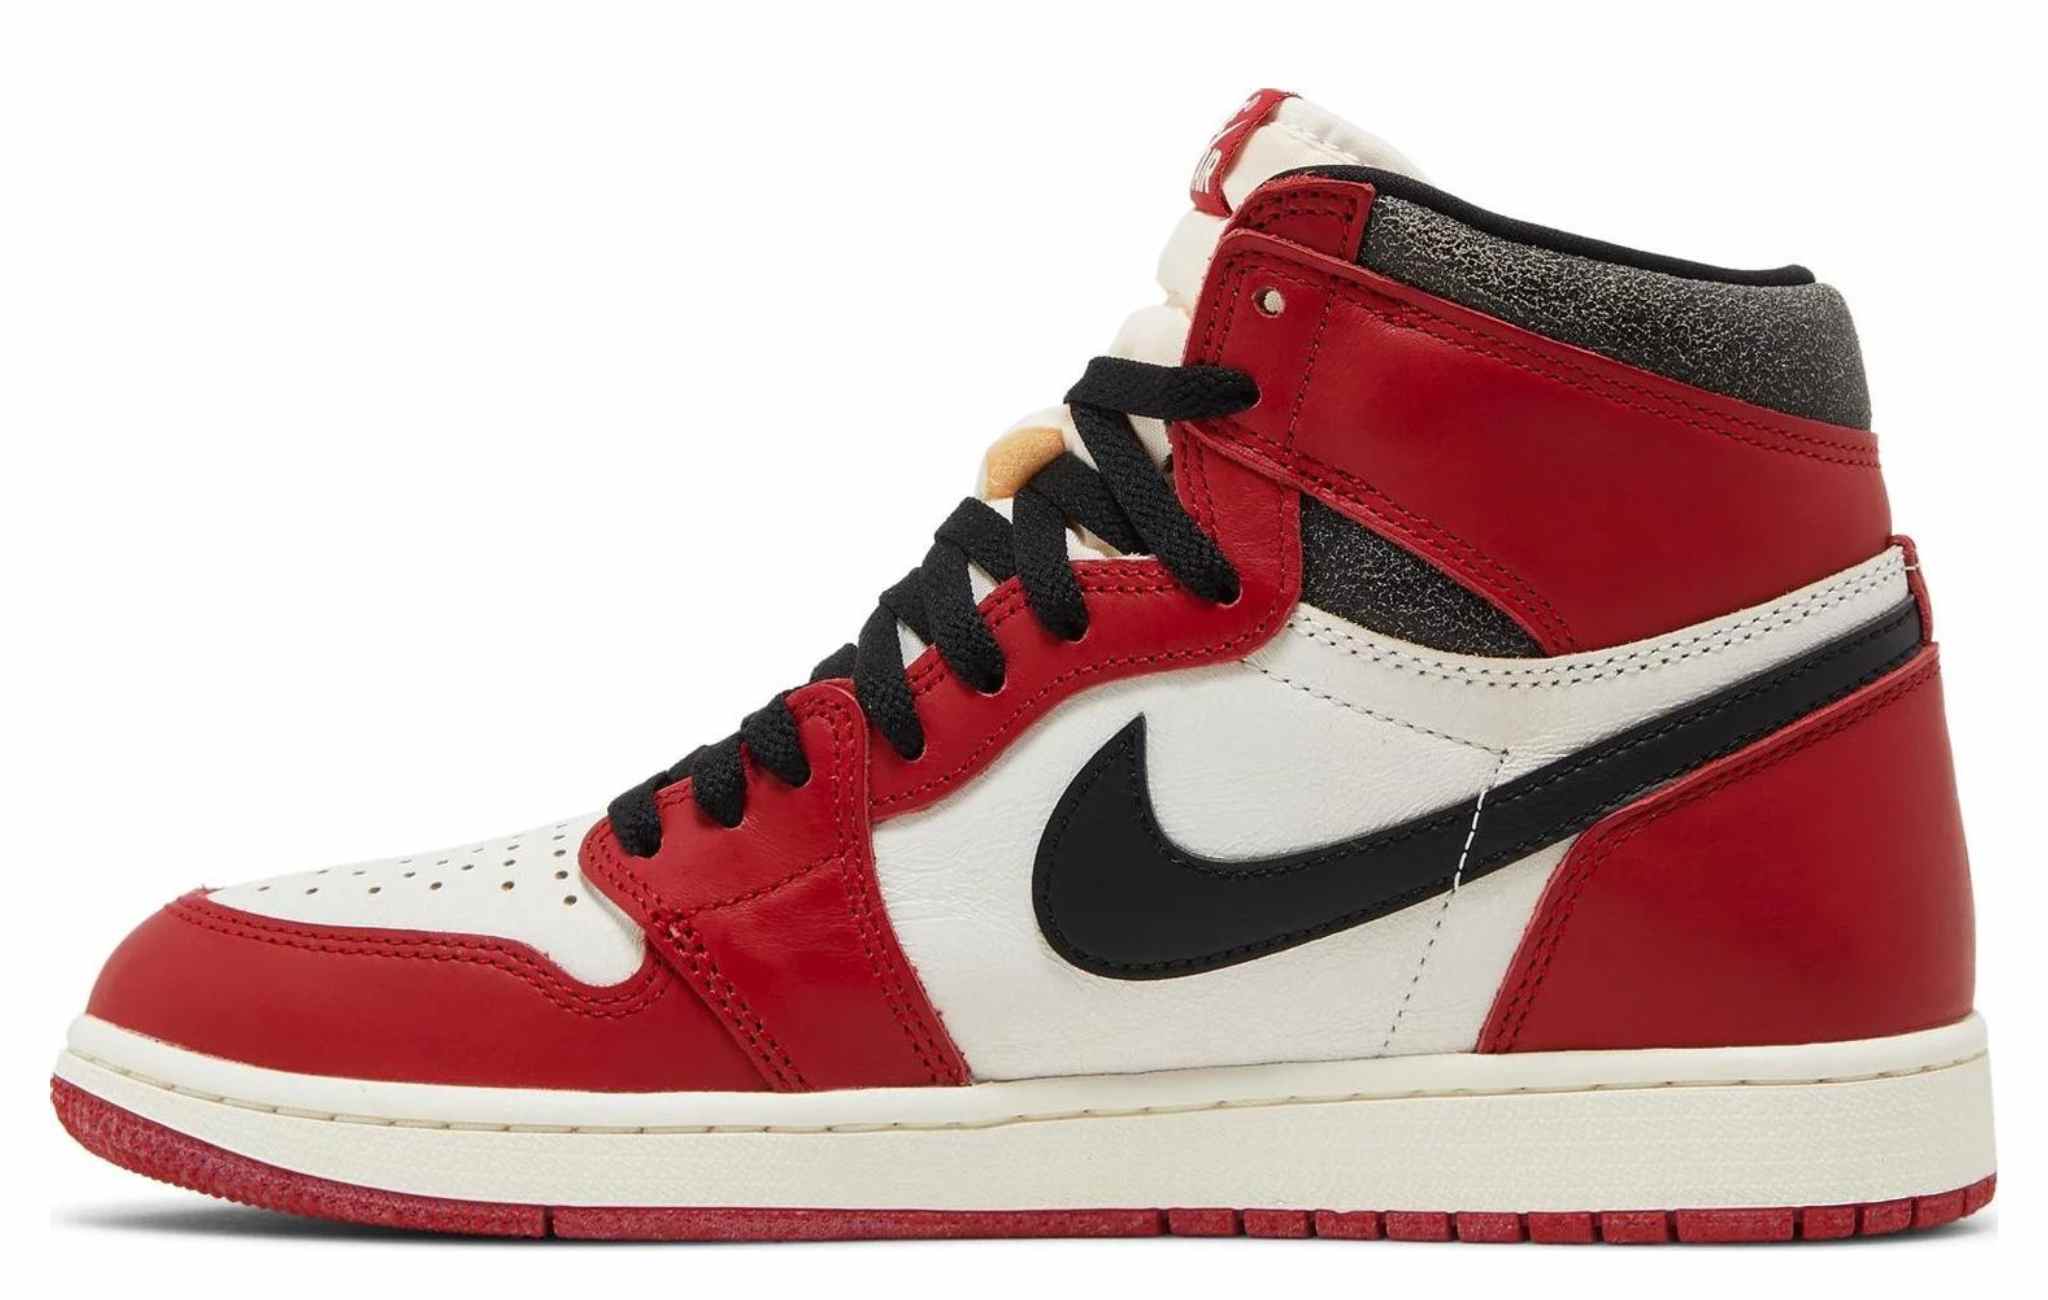 Nike Air Jordan 1 Retro High OG 'Chicago Lost and Found'